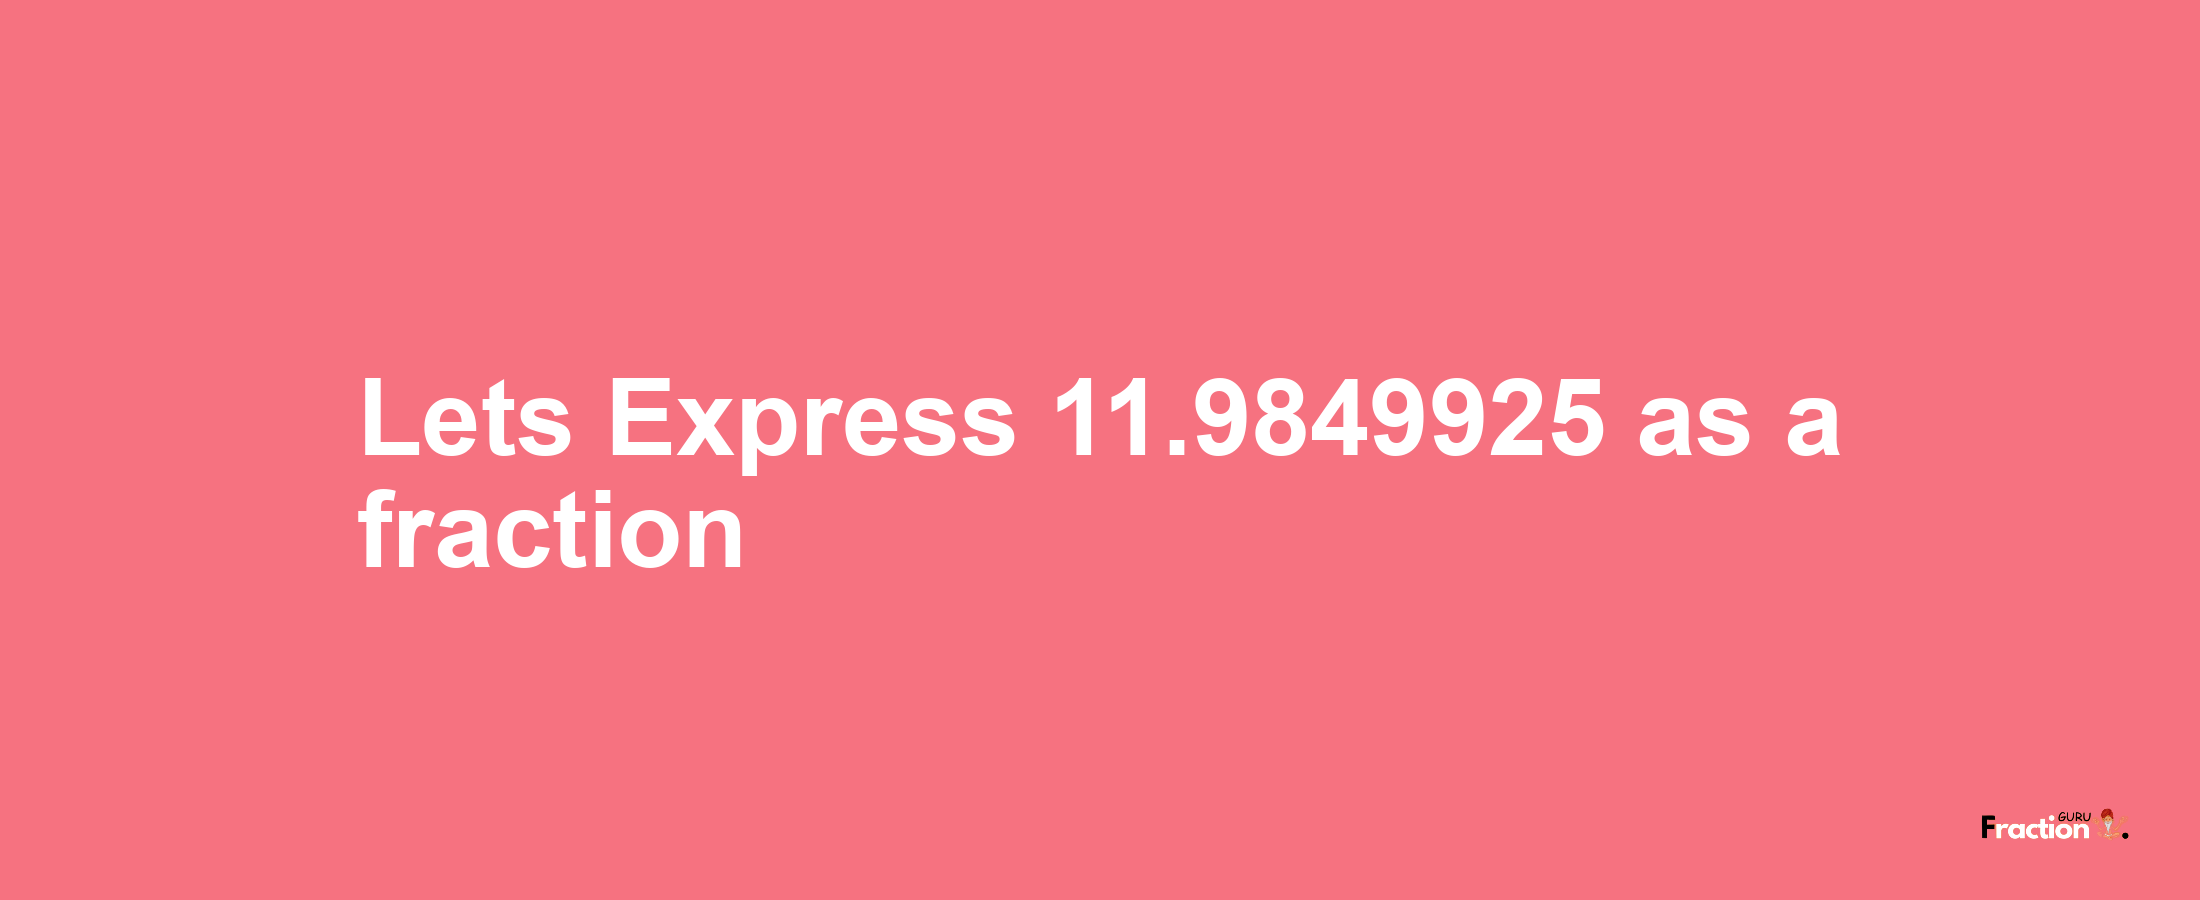 Lets Express 11.9849925 as afraction